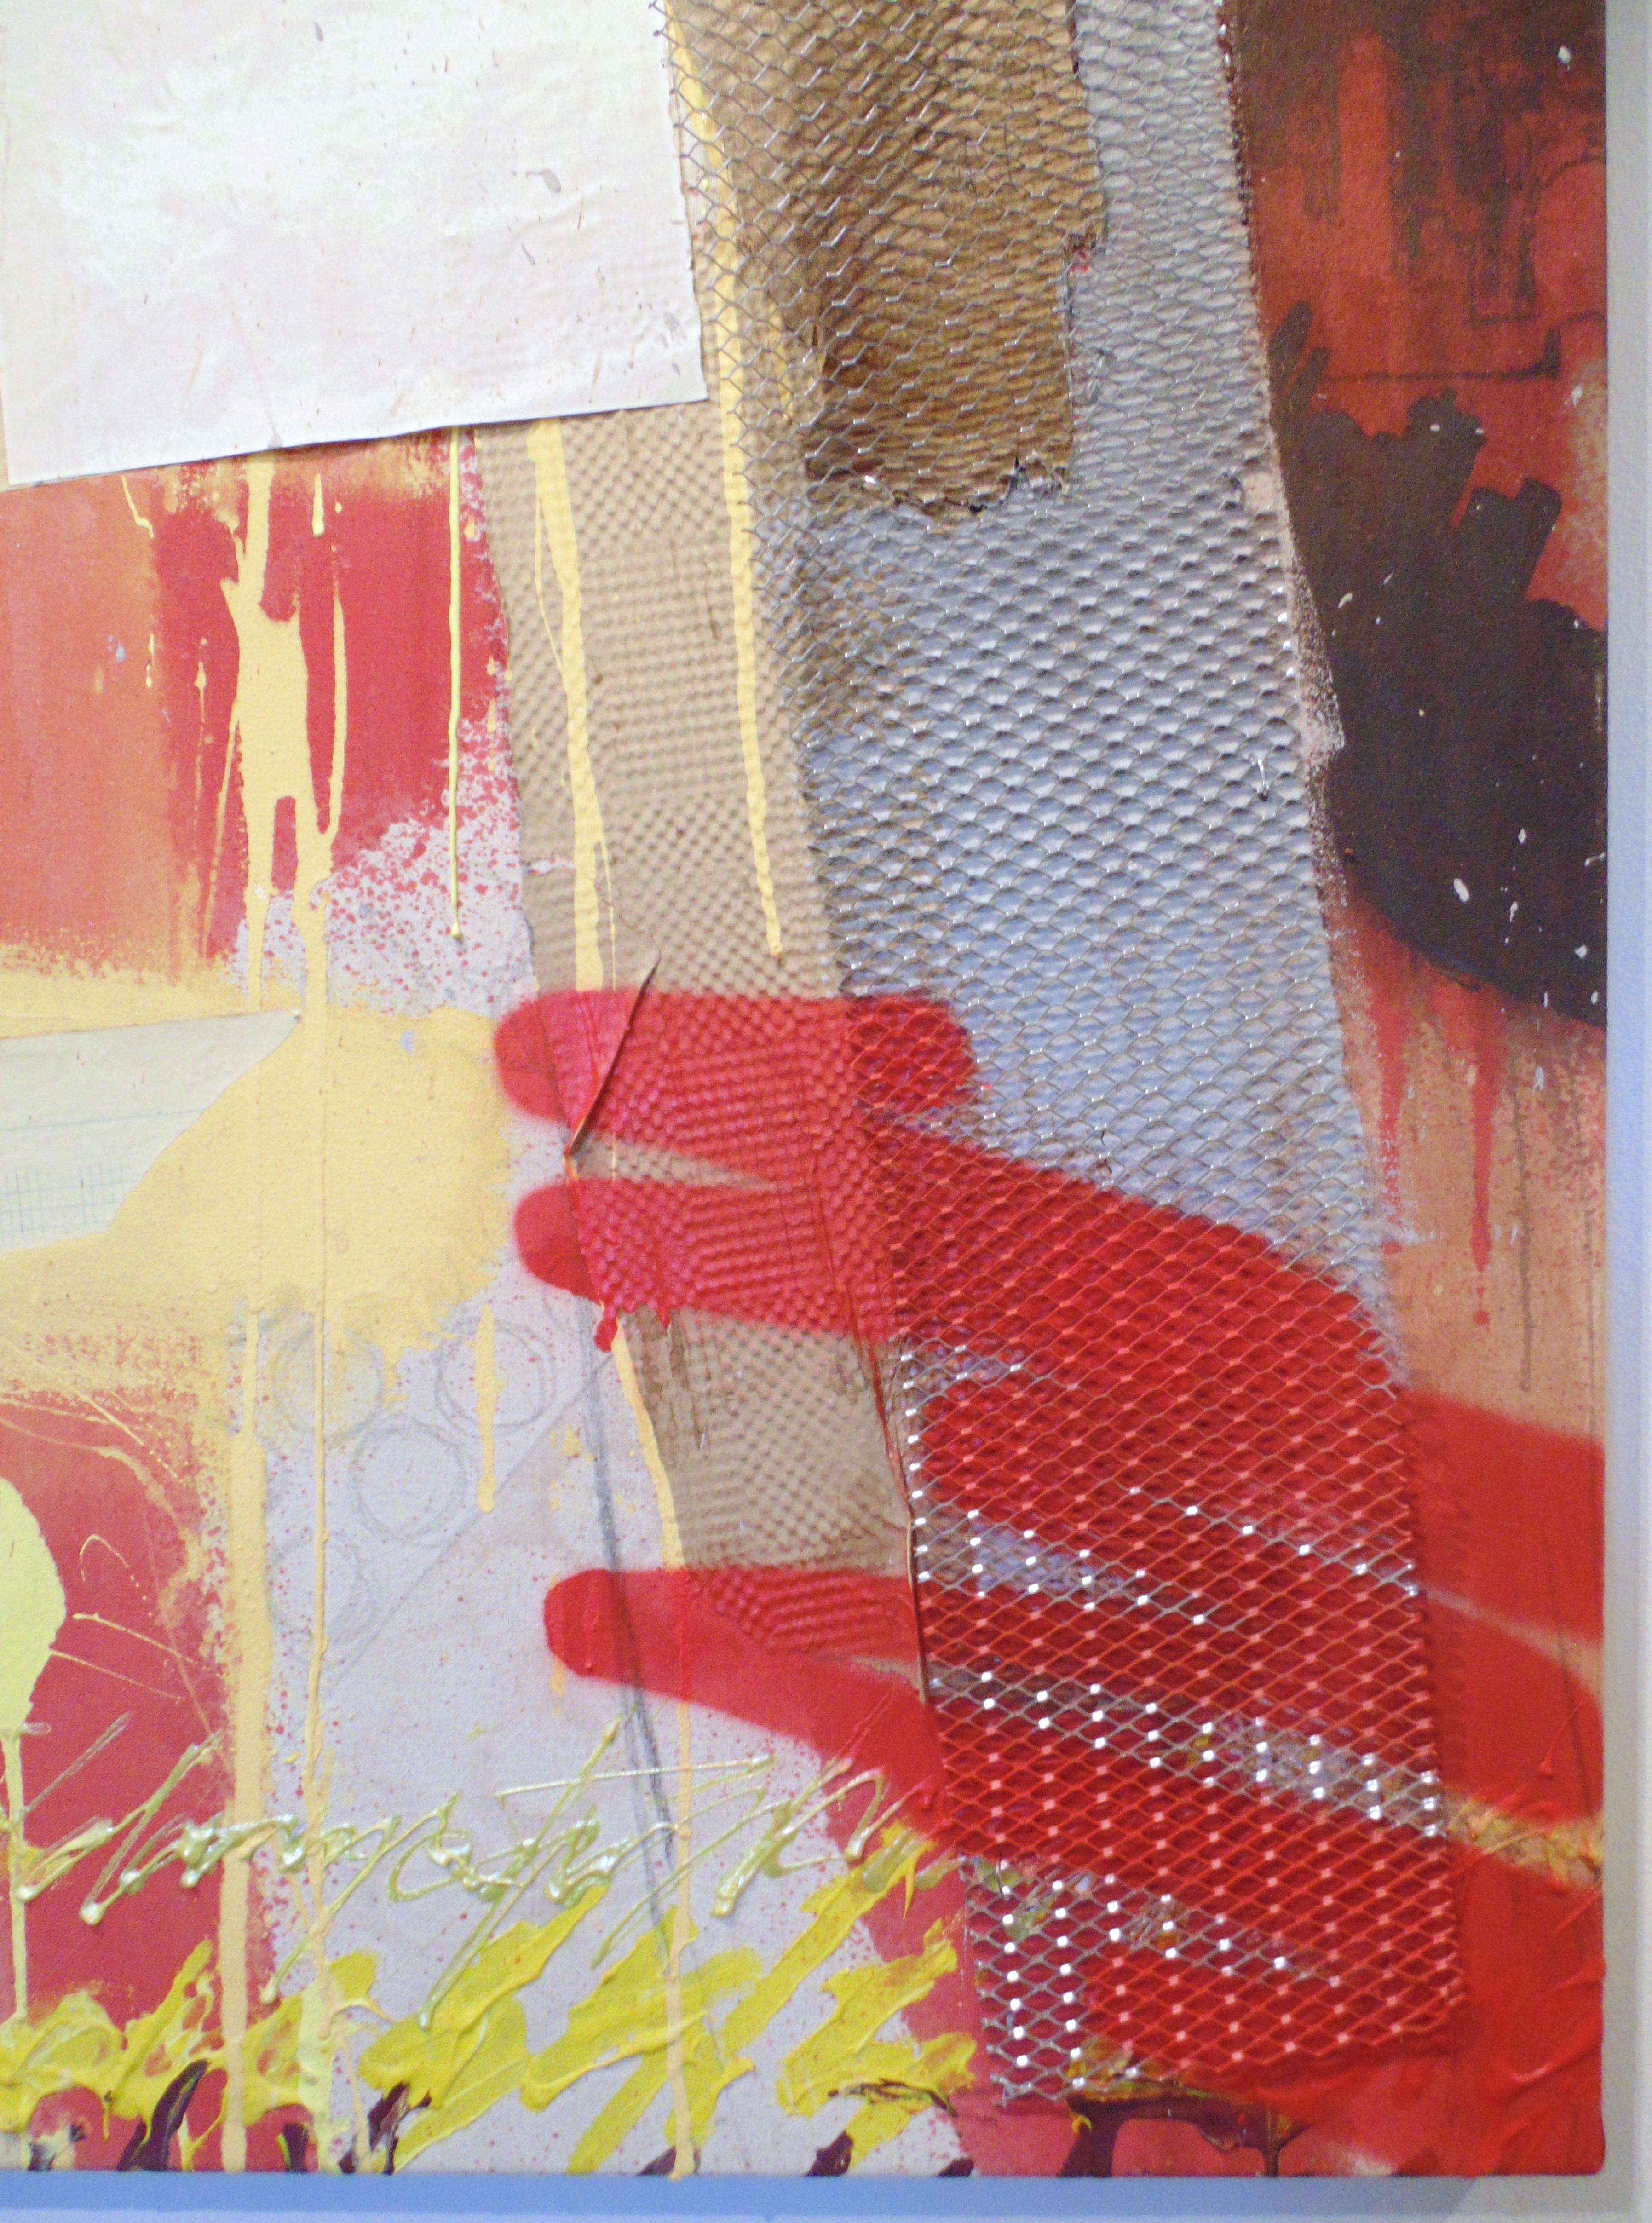 Number 2, 2014, graffiti, street art, abstract, text, collage, red, yellow - Painting by NTEL